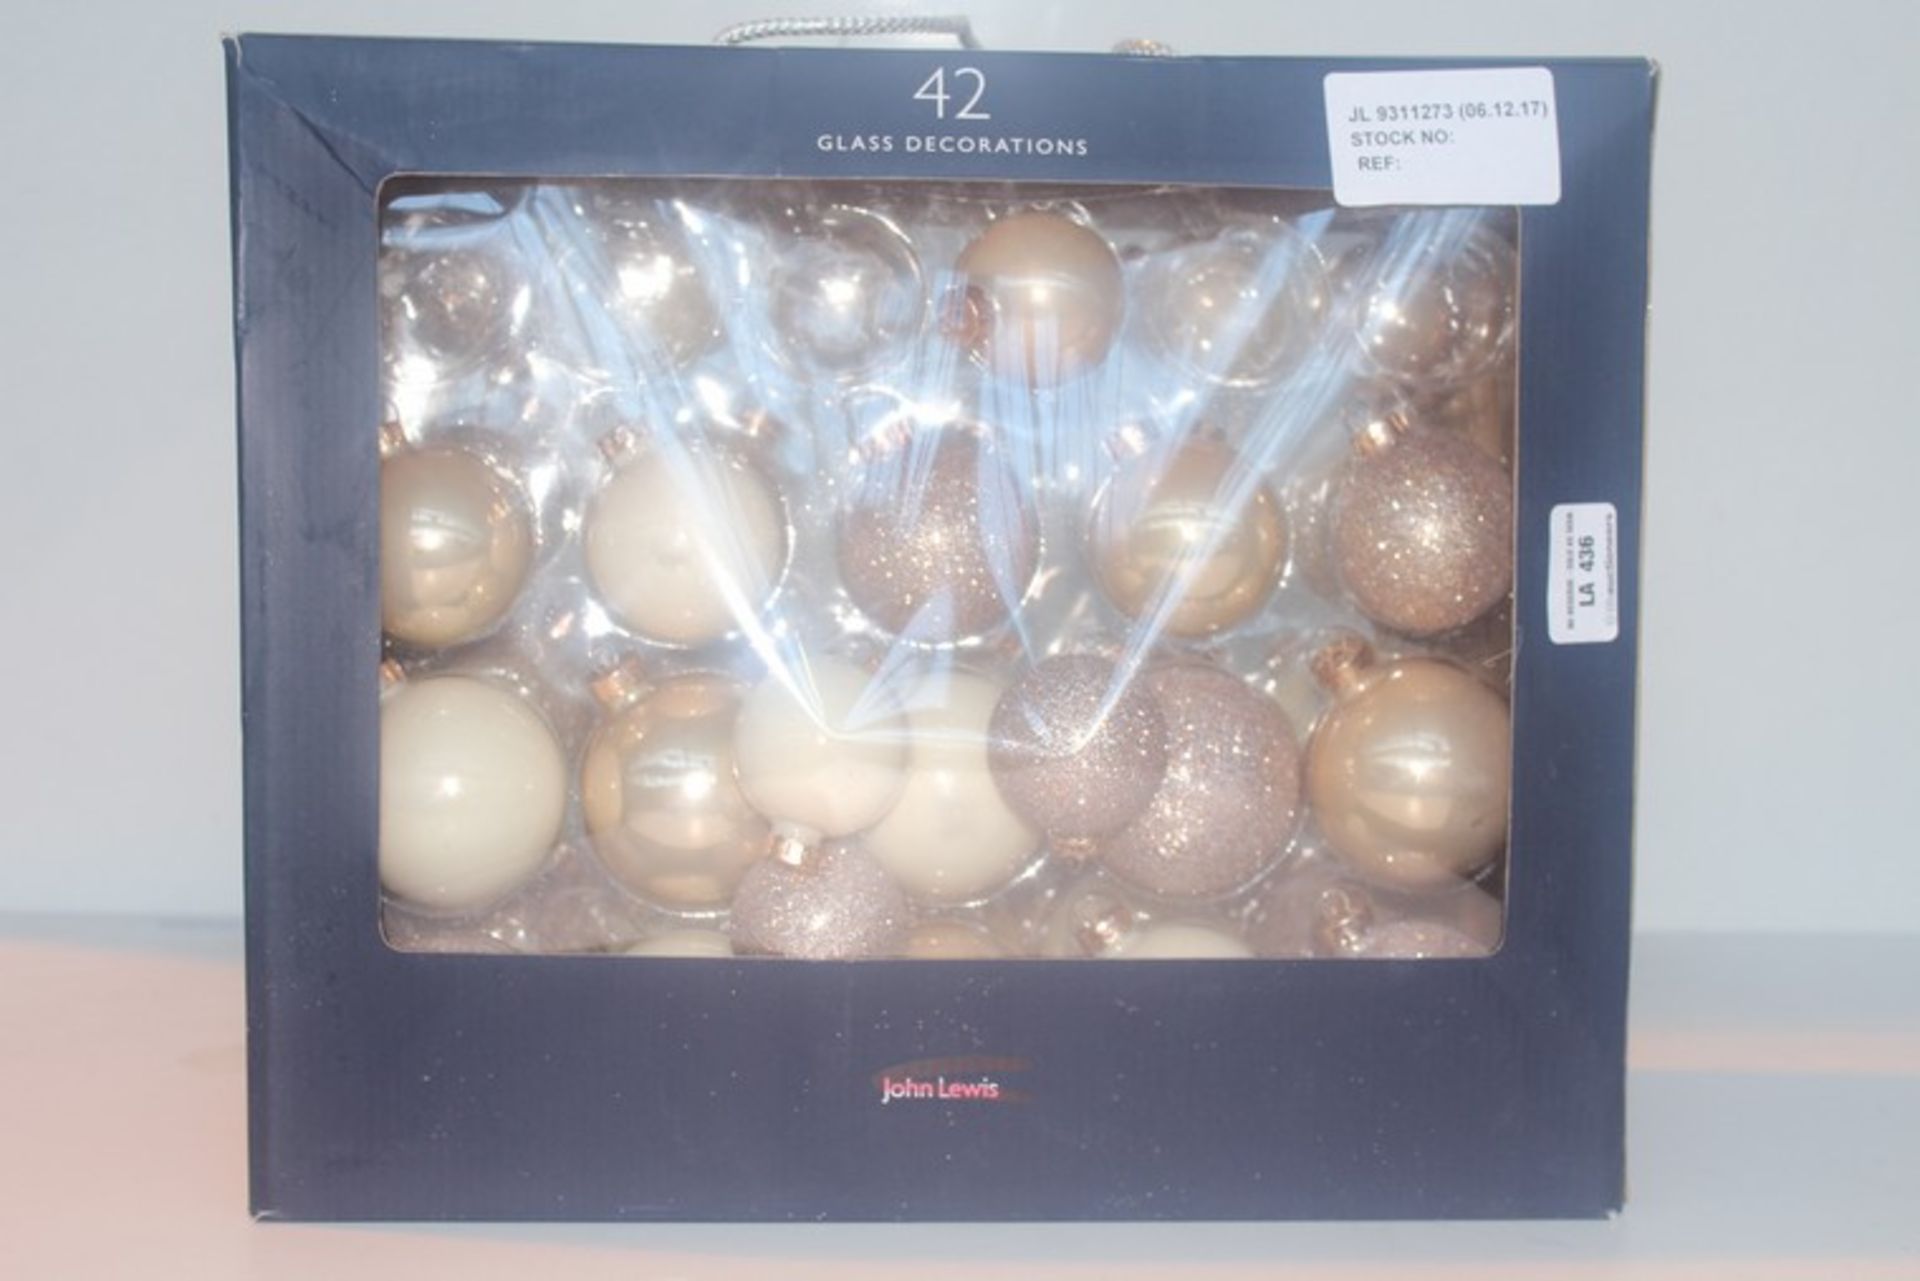 2 x 242 GLASS BAUBLE DECORATION BOXES (06.11.17) *PLEASE NOTE THAT THE BID PRICE IS MULTIPLIED BY